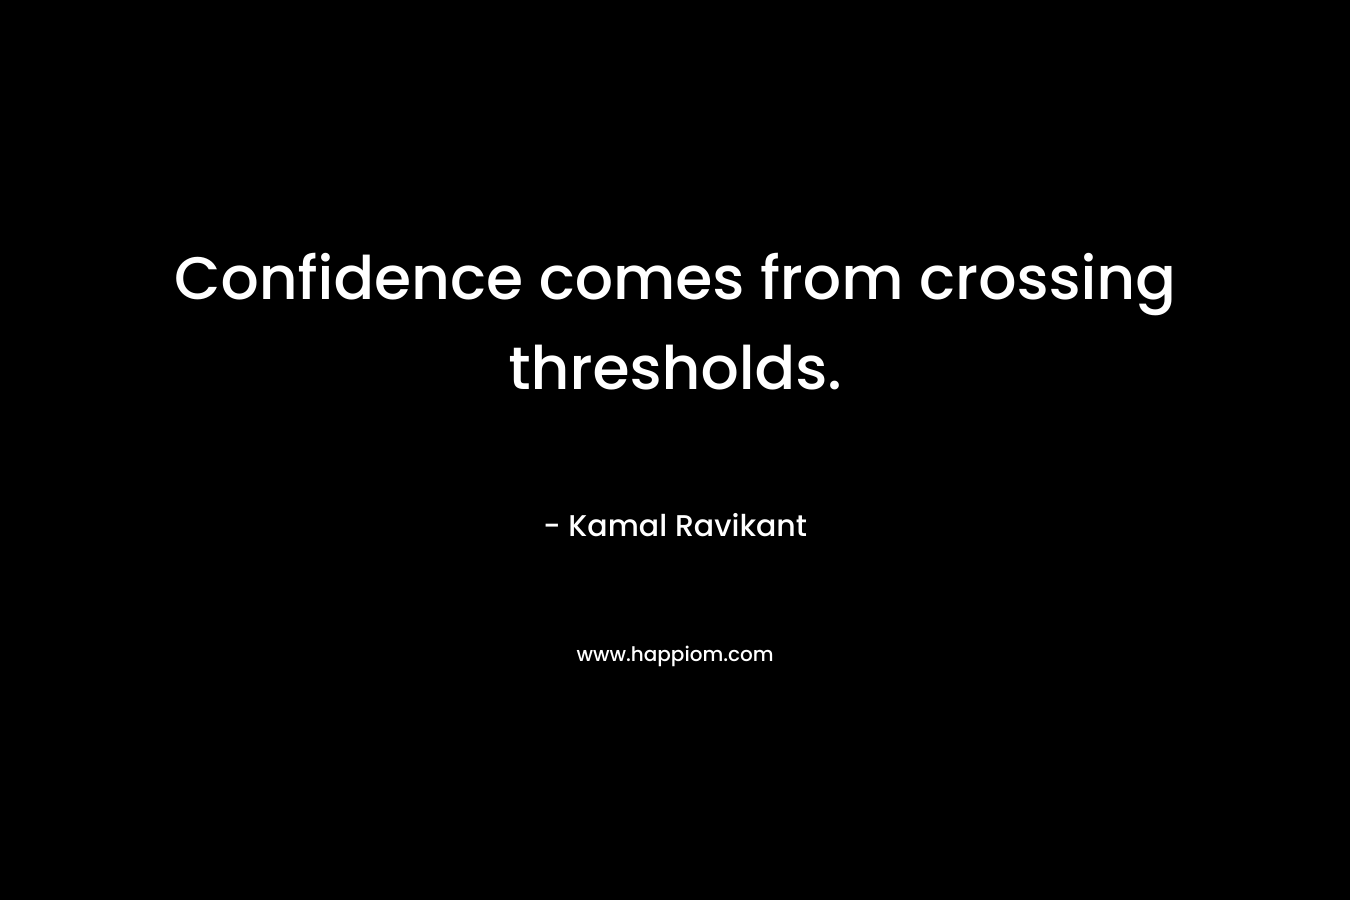 Confidence comes from crossing thresholds.